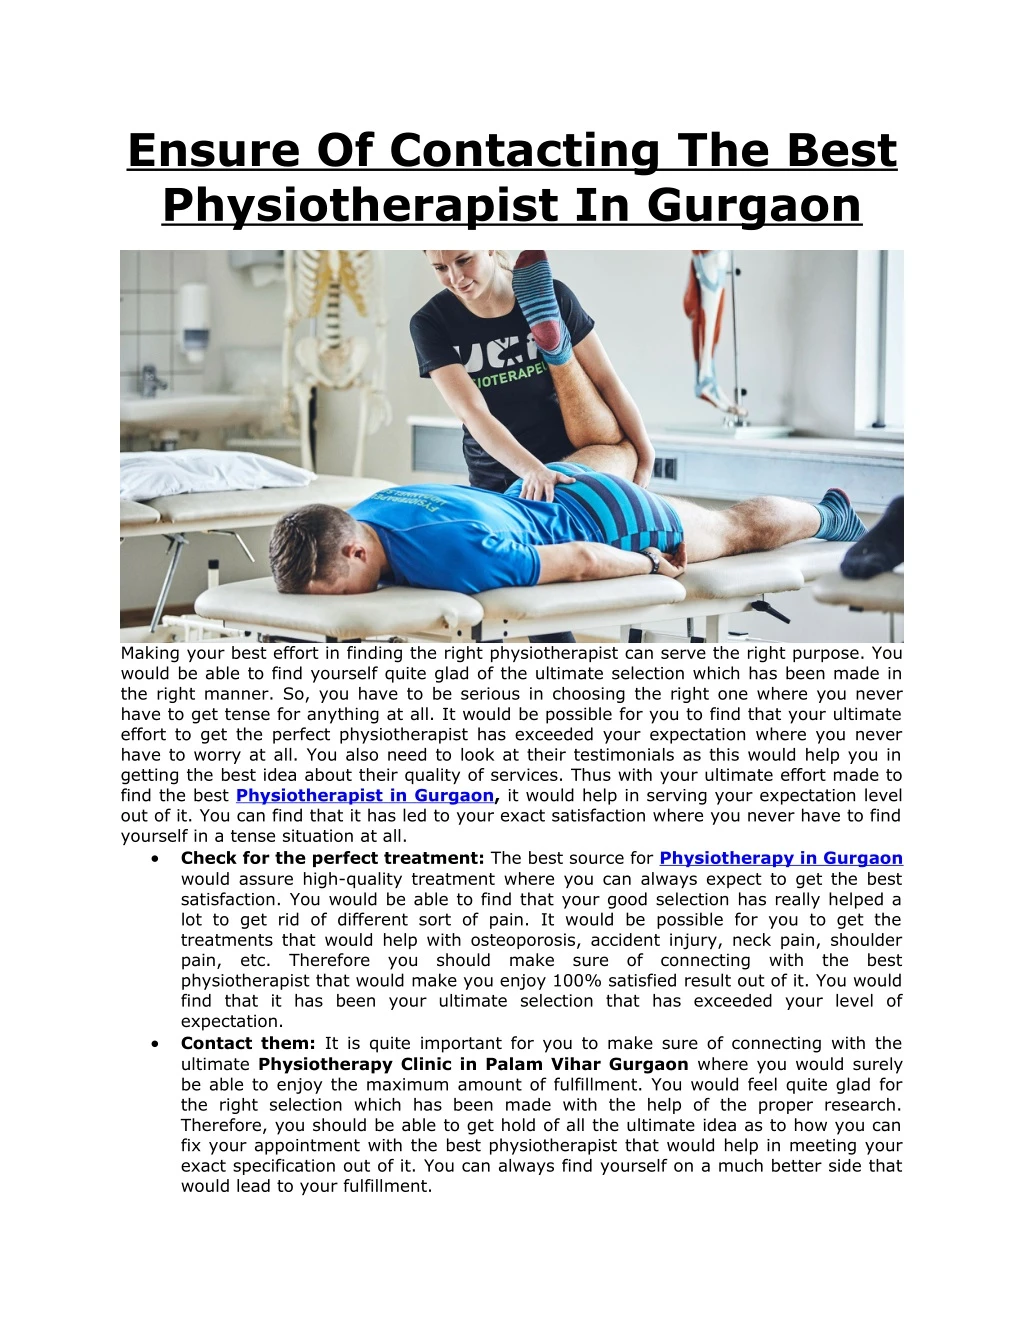 ensure of contacting the best physiotherapist